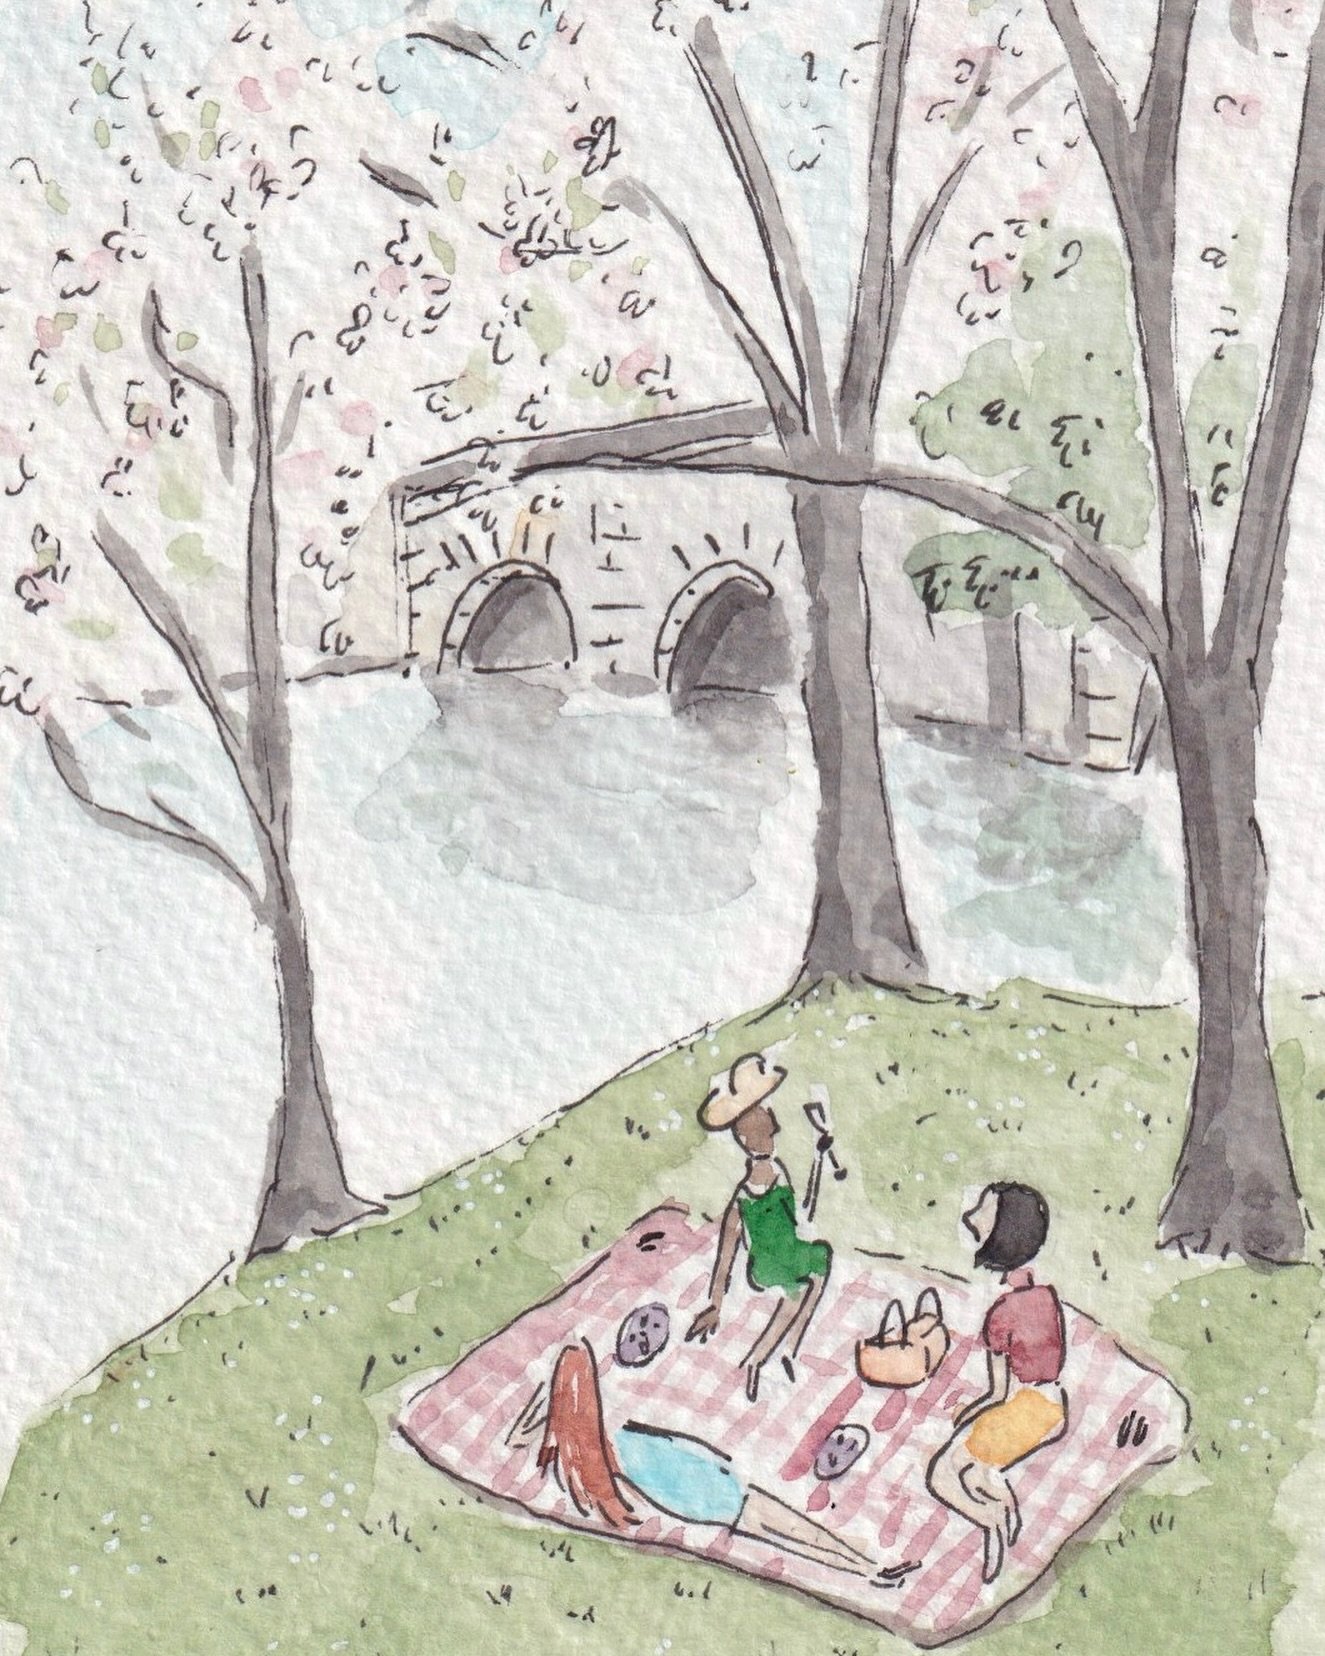 One of the originals I&rsquo;ll be bringing to the Mother&rsquo;s Day art show Saturday at Carlyle square in Alexandria 11-5! I took inspiration from friends having a picnic on the shores of the Tidal Basin in DC during peak bloom of the cherry bloss